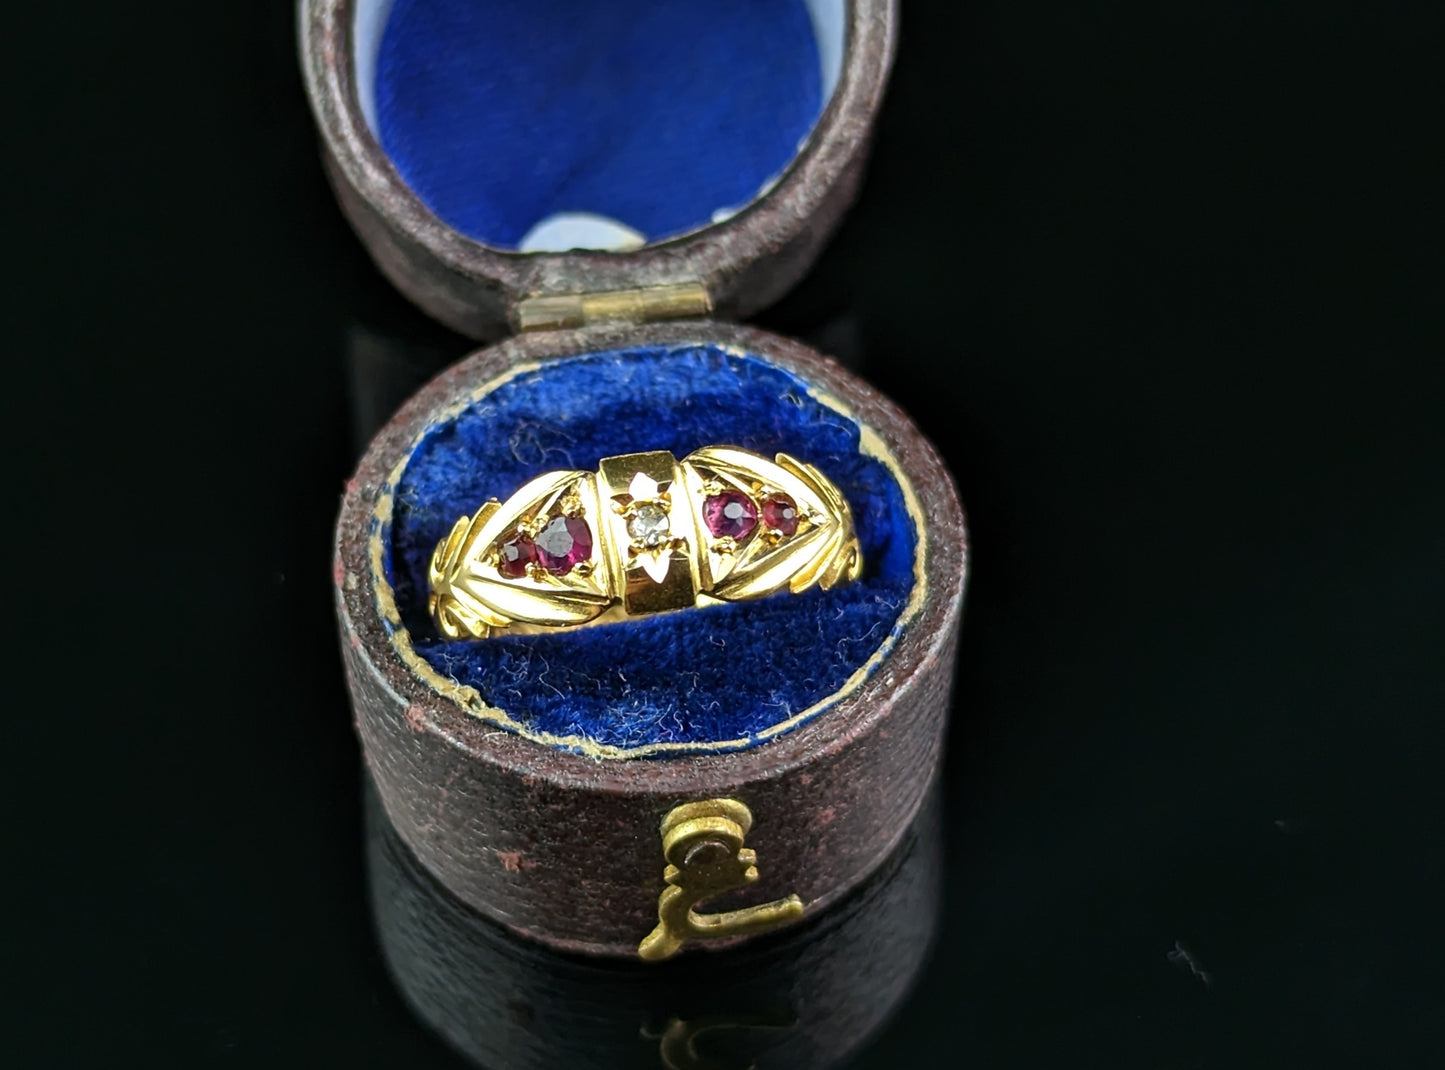 Antique Ruby and Diamond ring, 18ct gold, Edwardian